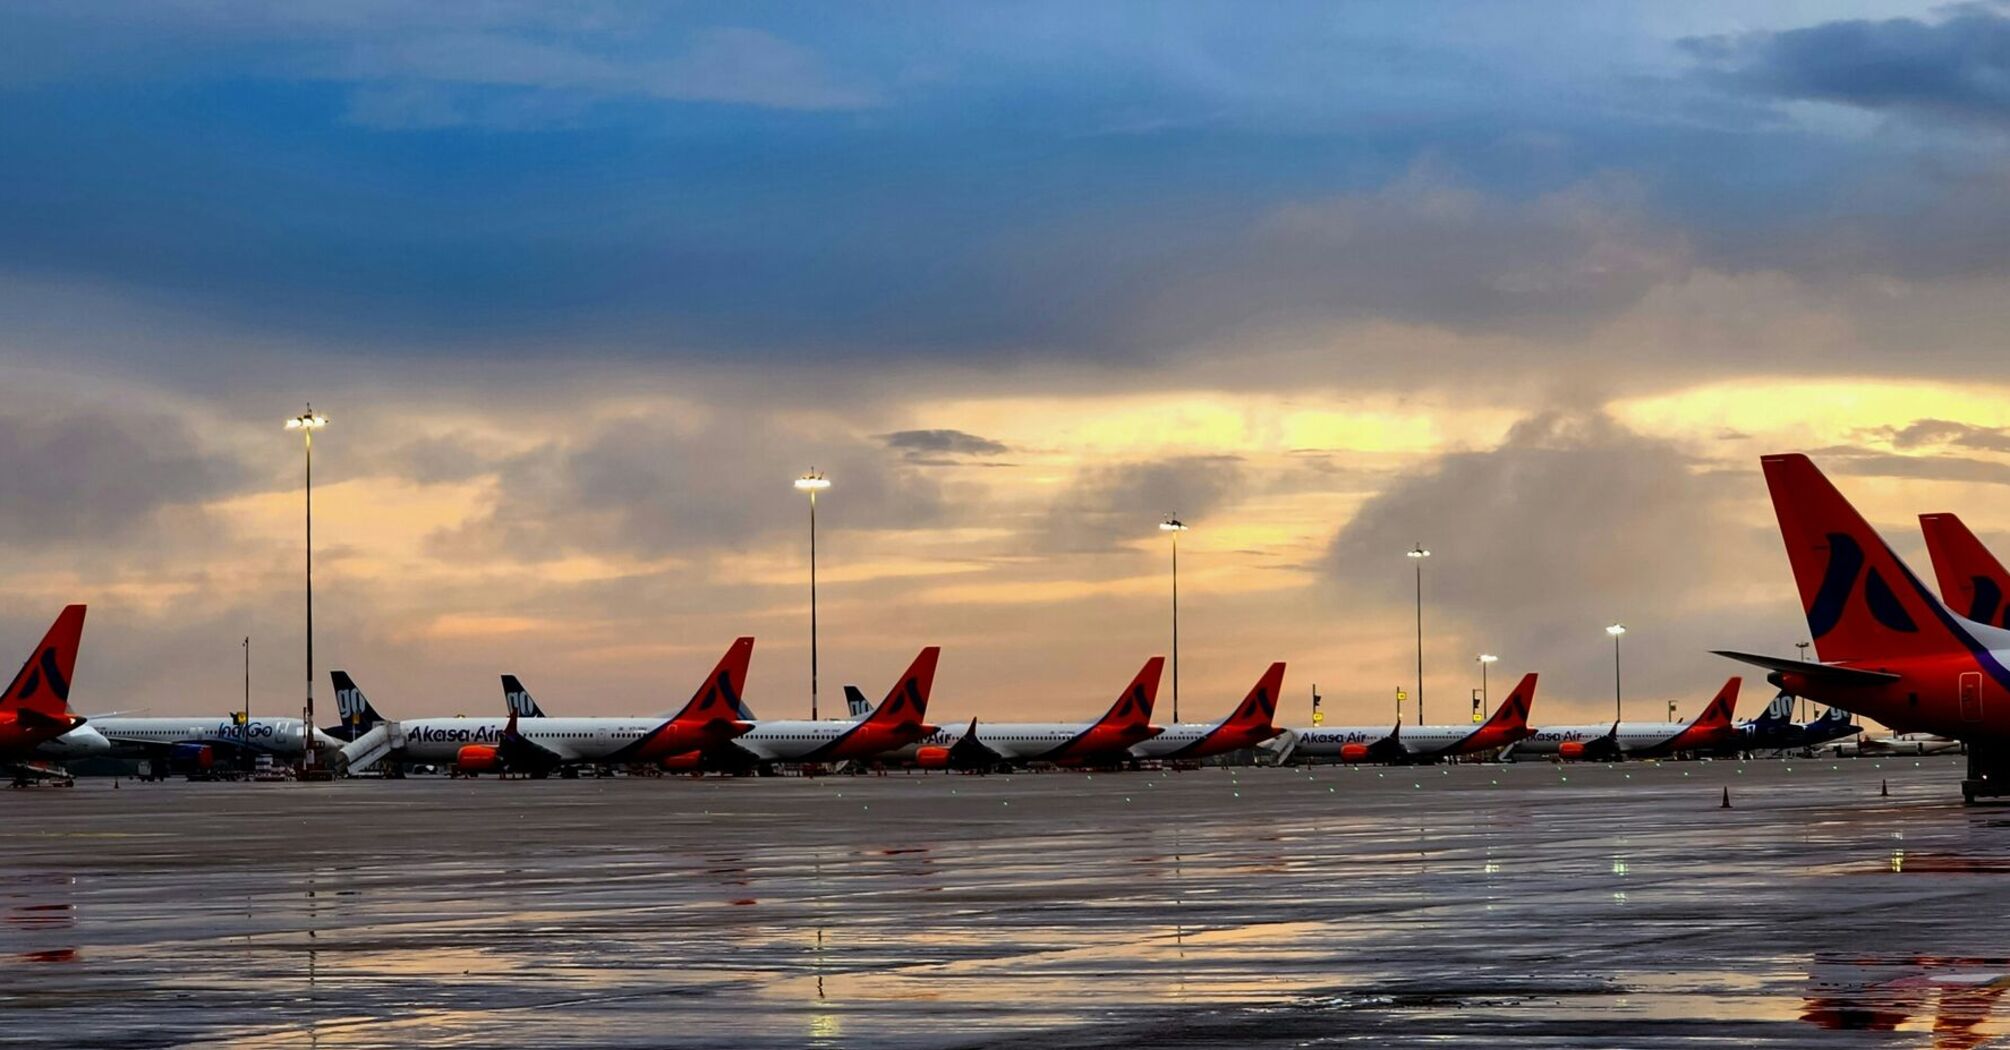 A row of airplanes sitting on top of an airport tarmac